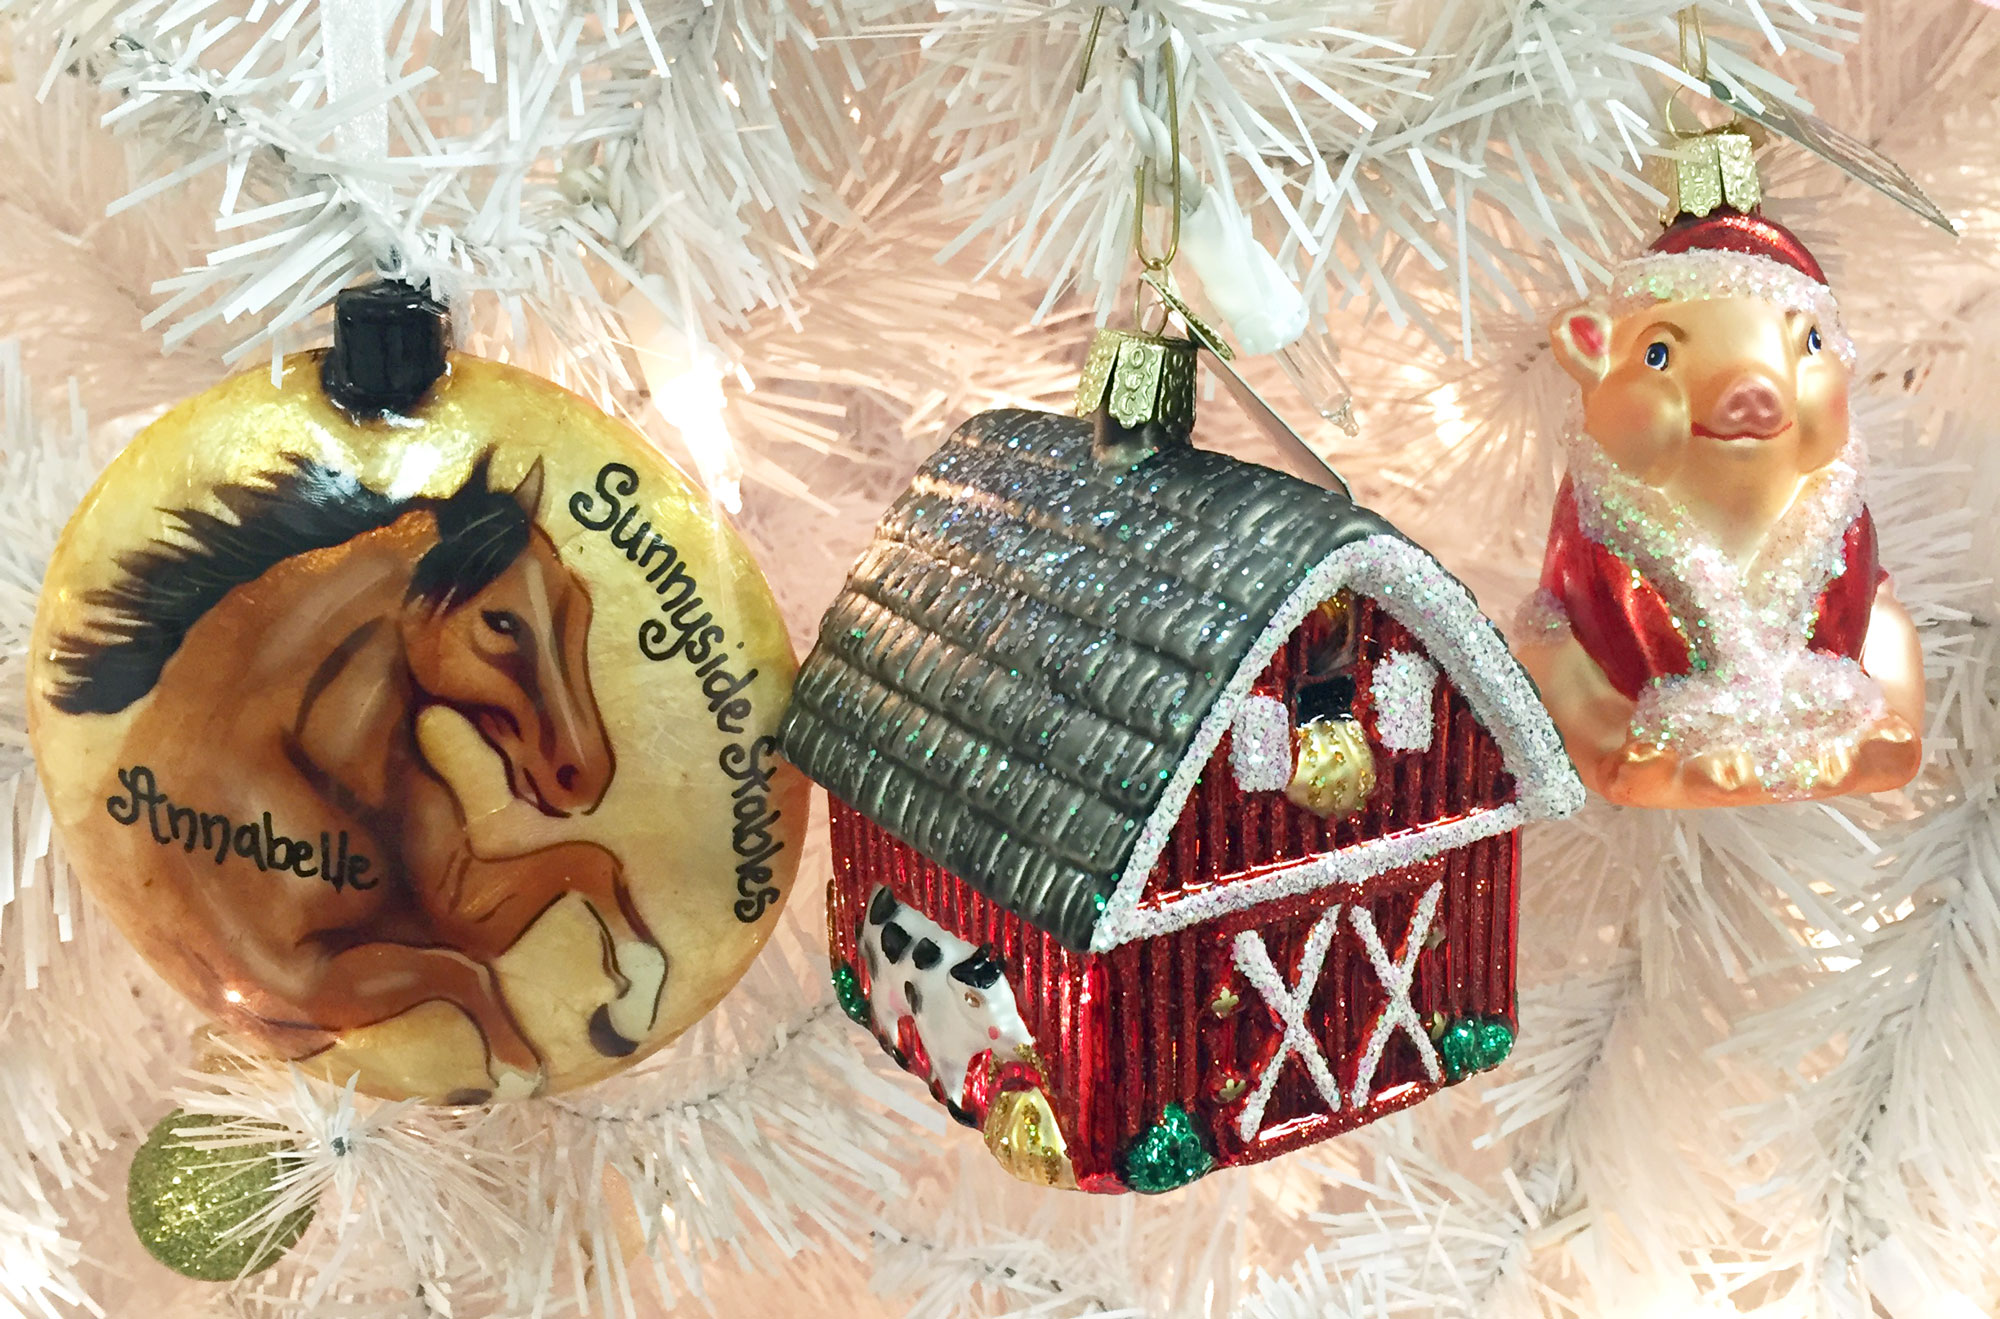 Farm animal ornaments with a red barn celebrate pig and horse day | OrnamentShop.com